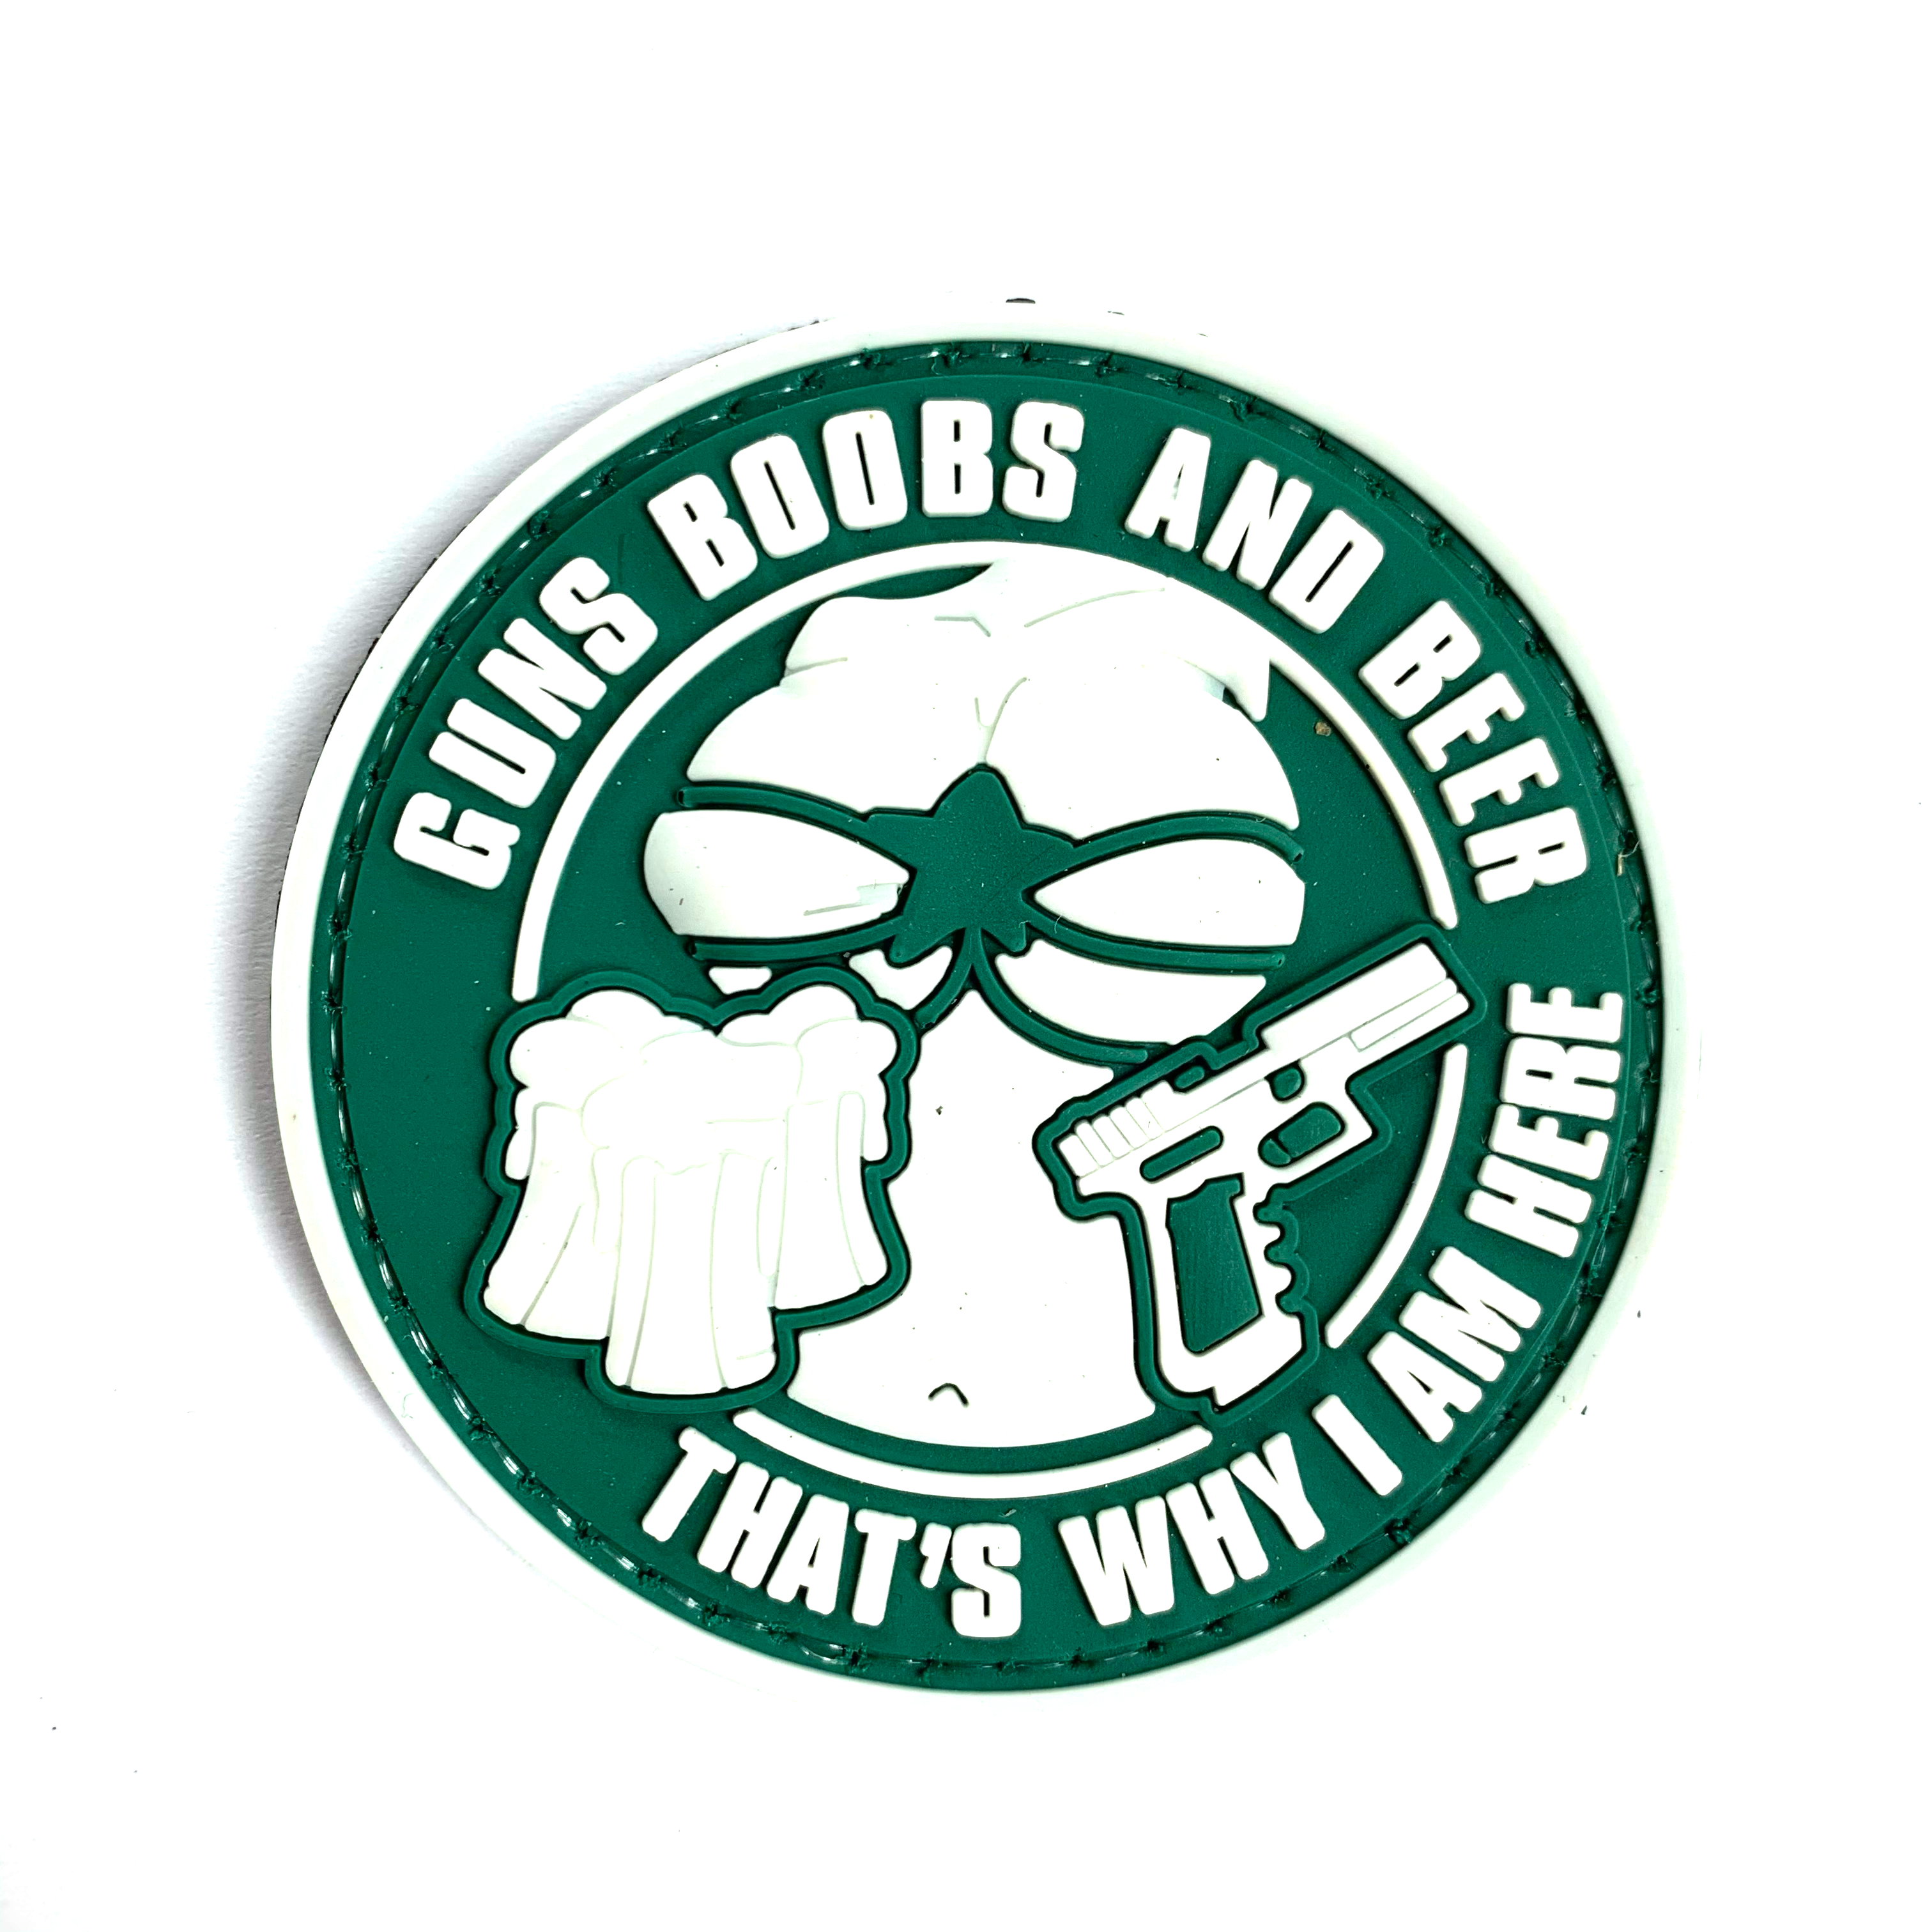 PVC Velcro Patch - Guns, Boobs and Beer (Green and White) - RPI Supplies